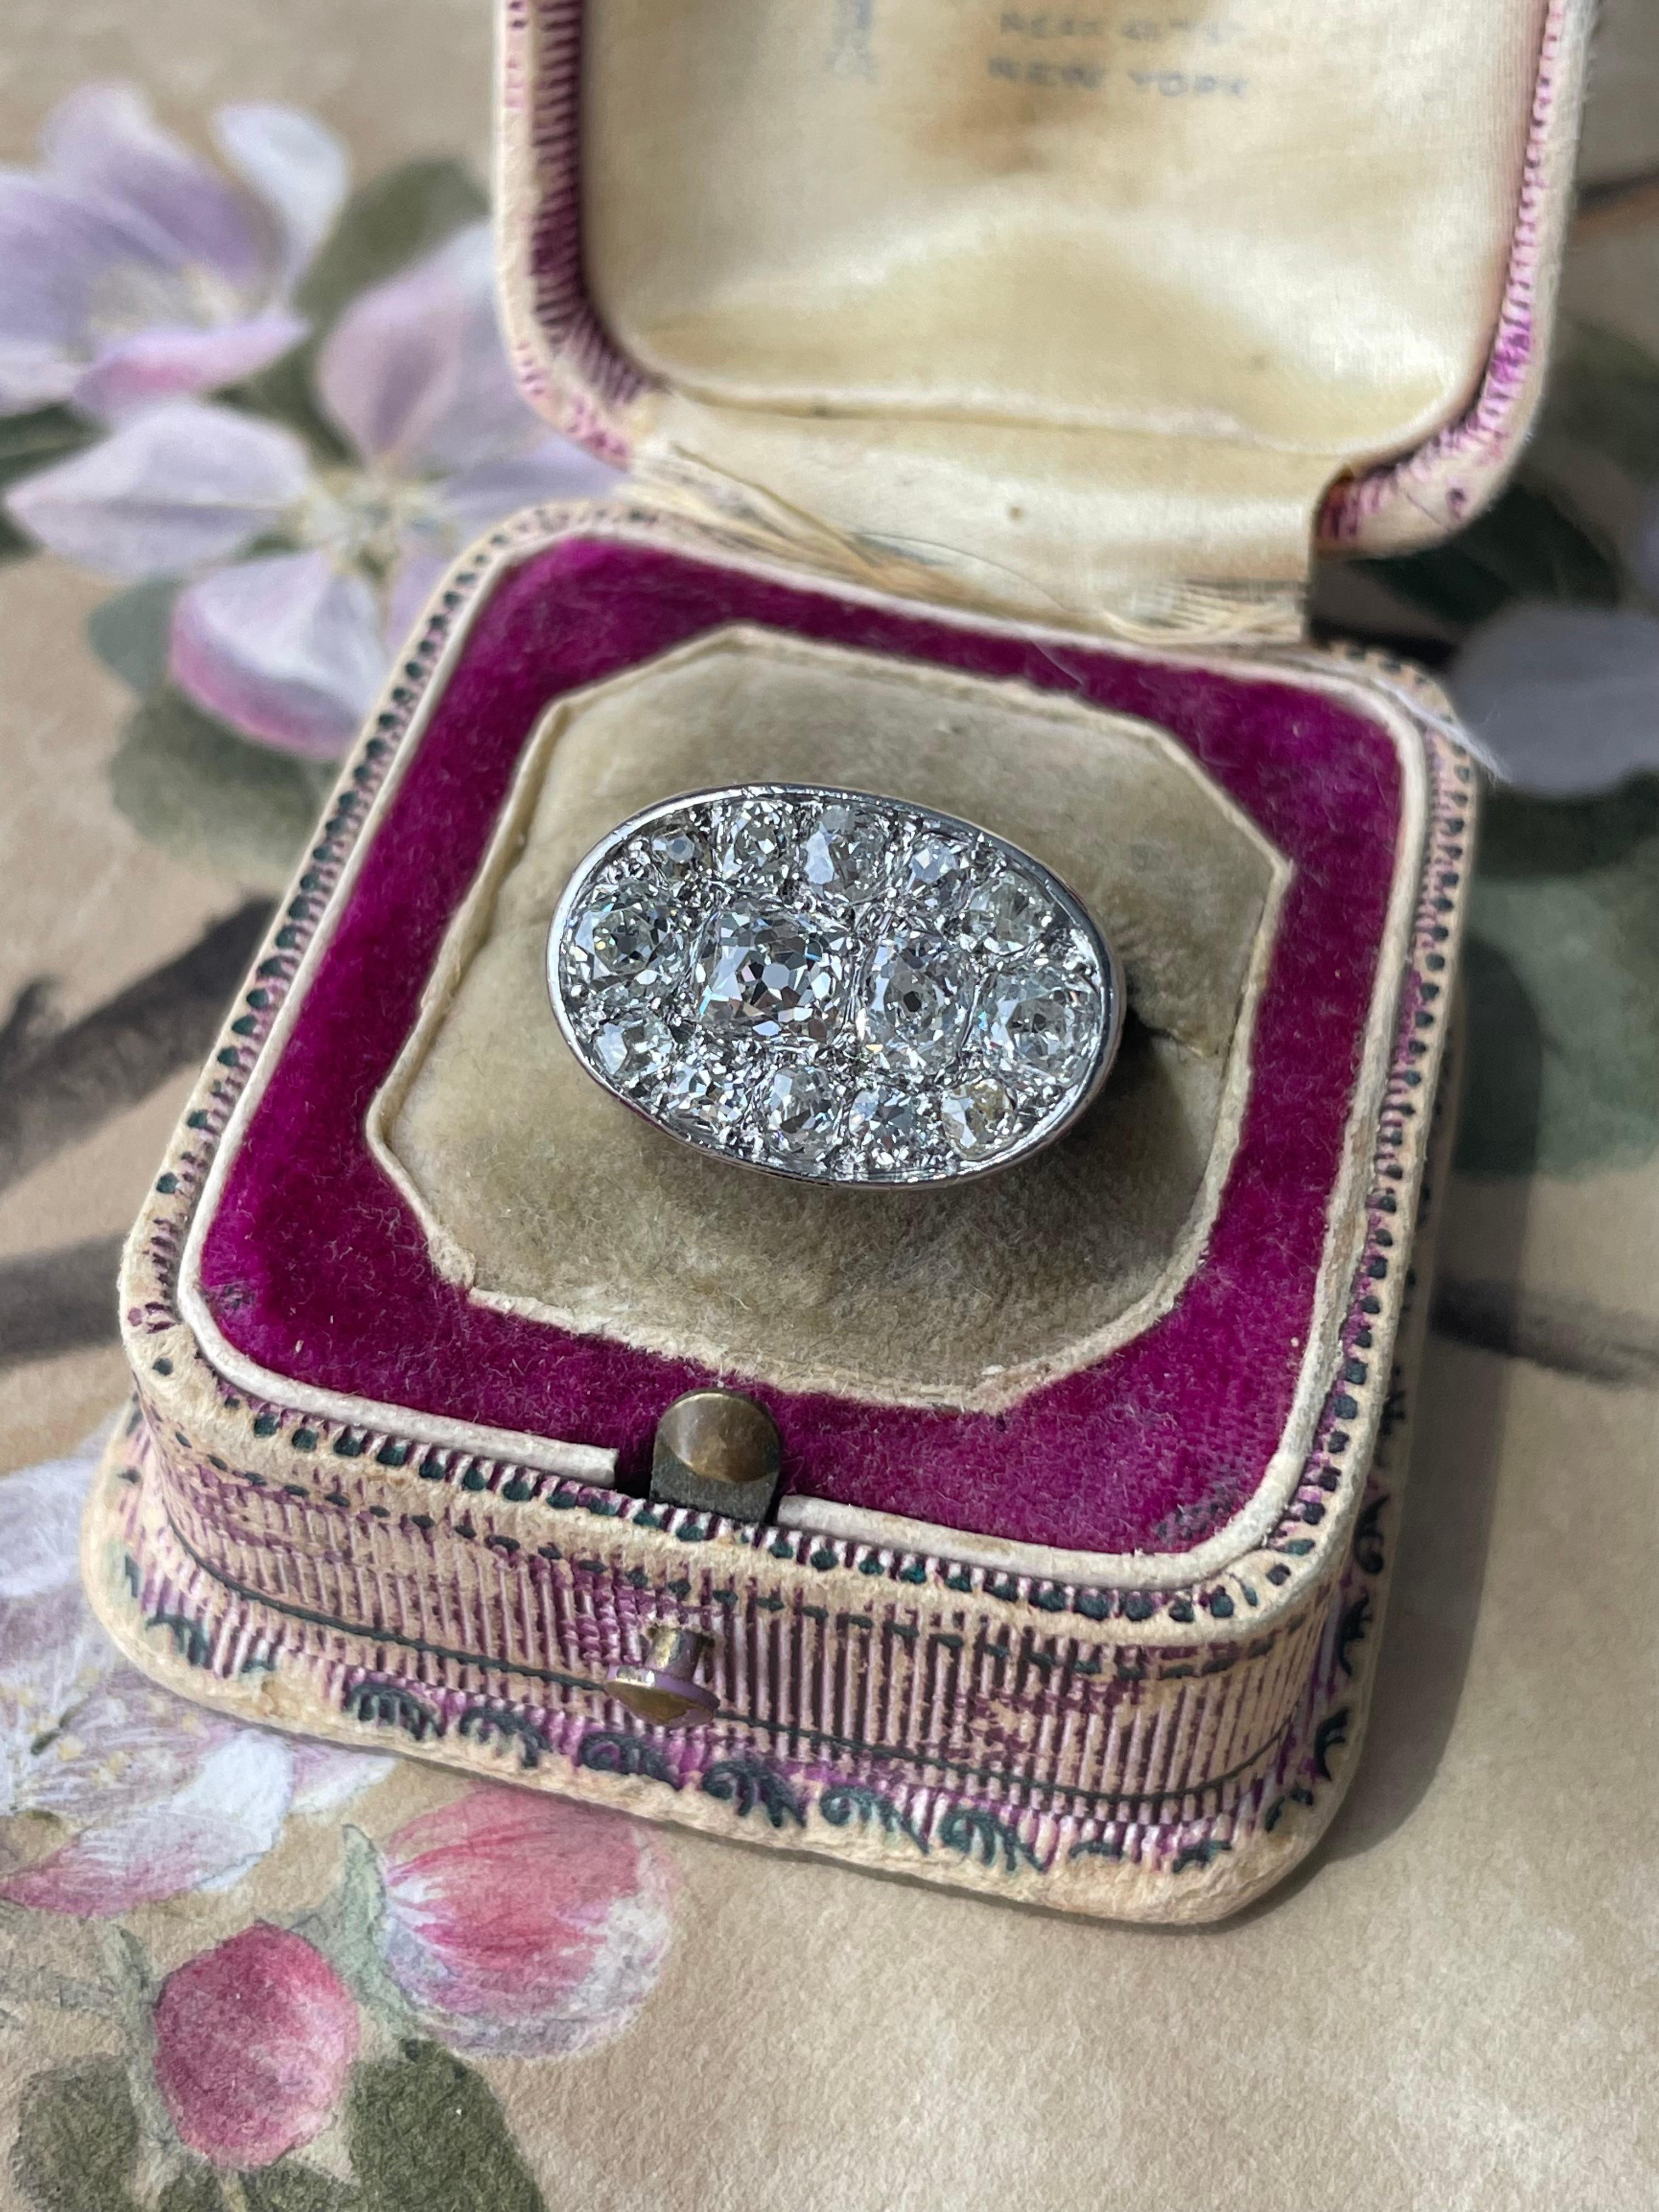 Dating from the peak of the Art Deco era in France, this dazzling cobblestone ring blazes with 2.20 carats of tightly packed mine-cut diamonds. Hand fabricated in 18k white gold and platinum. Signed. Currently a ring size 5.5



Diamonds: estimated